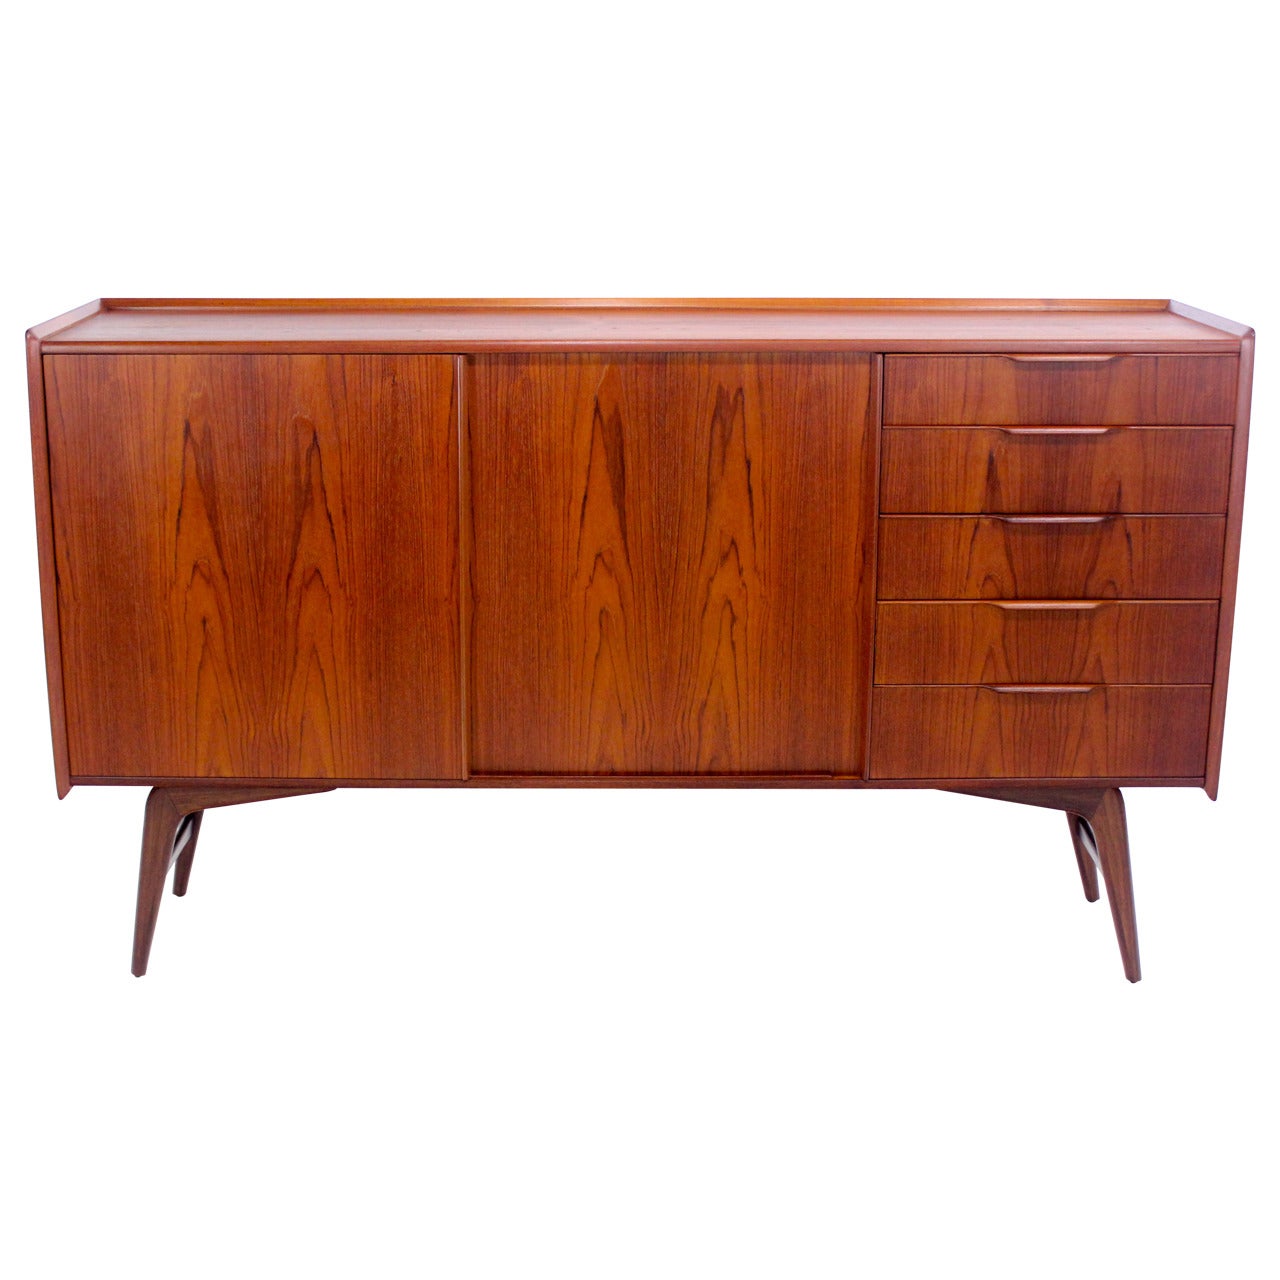 Early Danish Modern Teak Credenza Designed by Harry Ostergaard For Sale